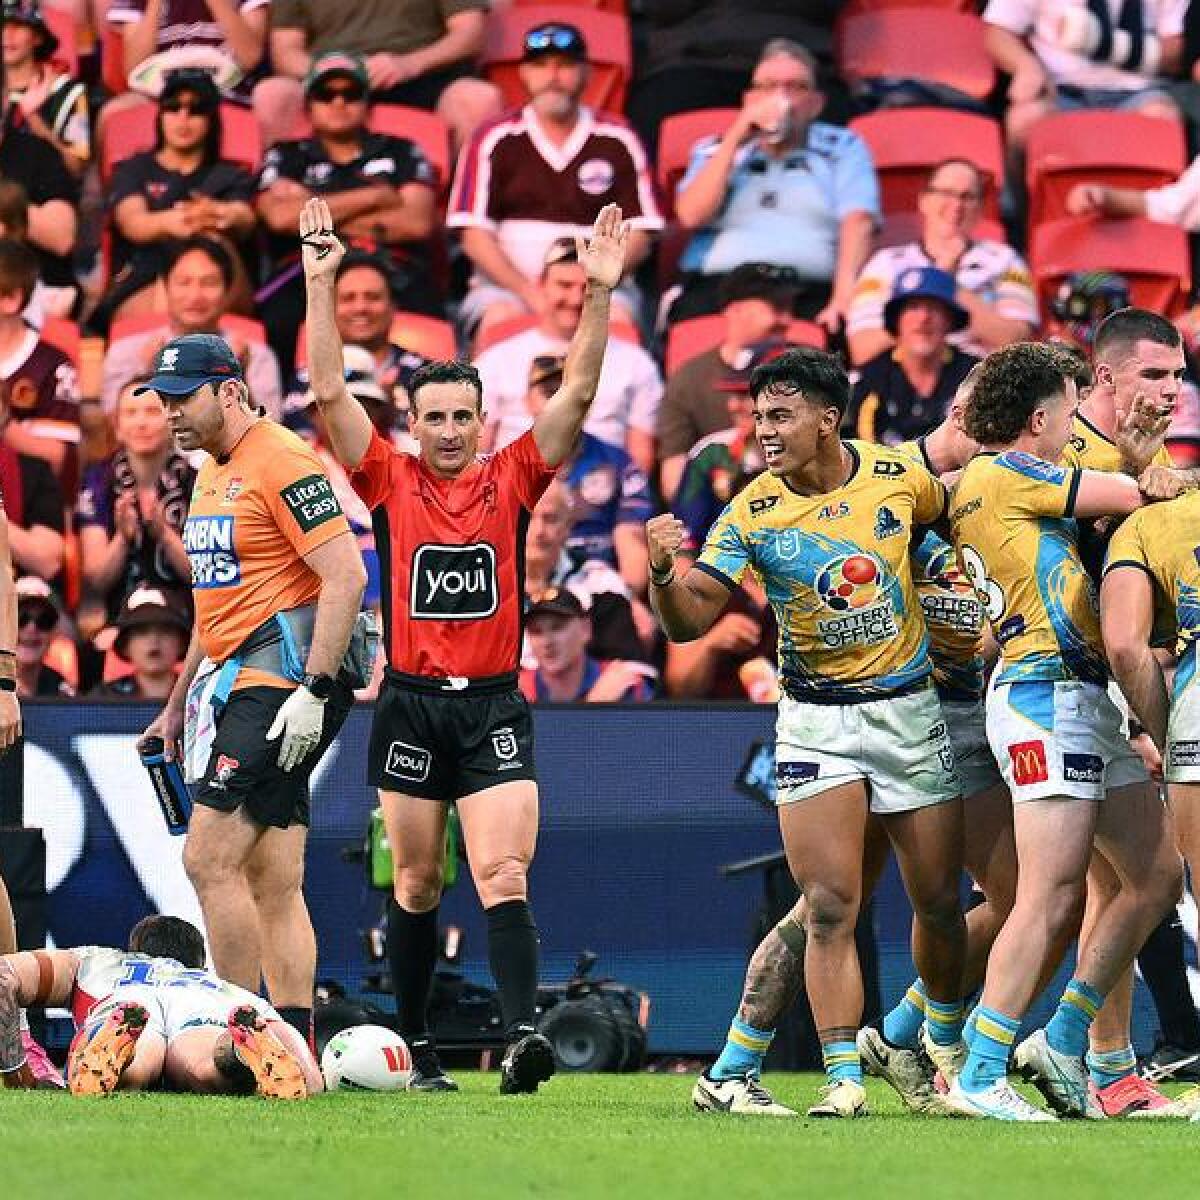 Titans players celebrating a try before it was overturned.